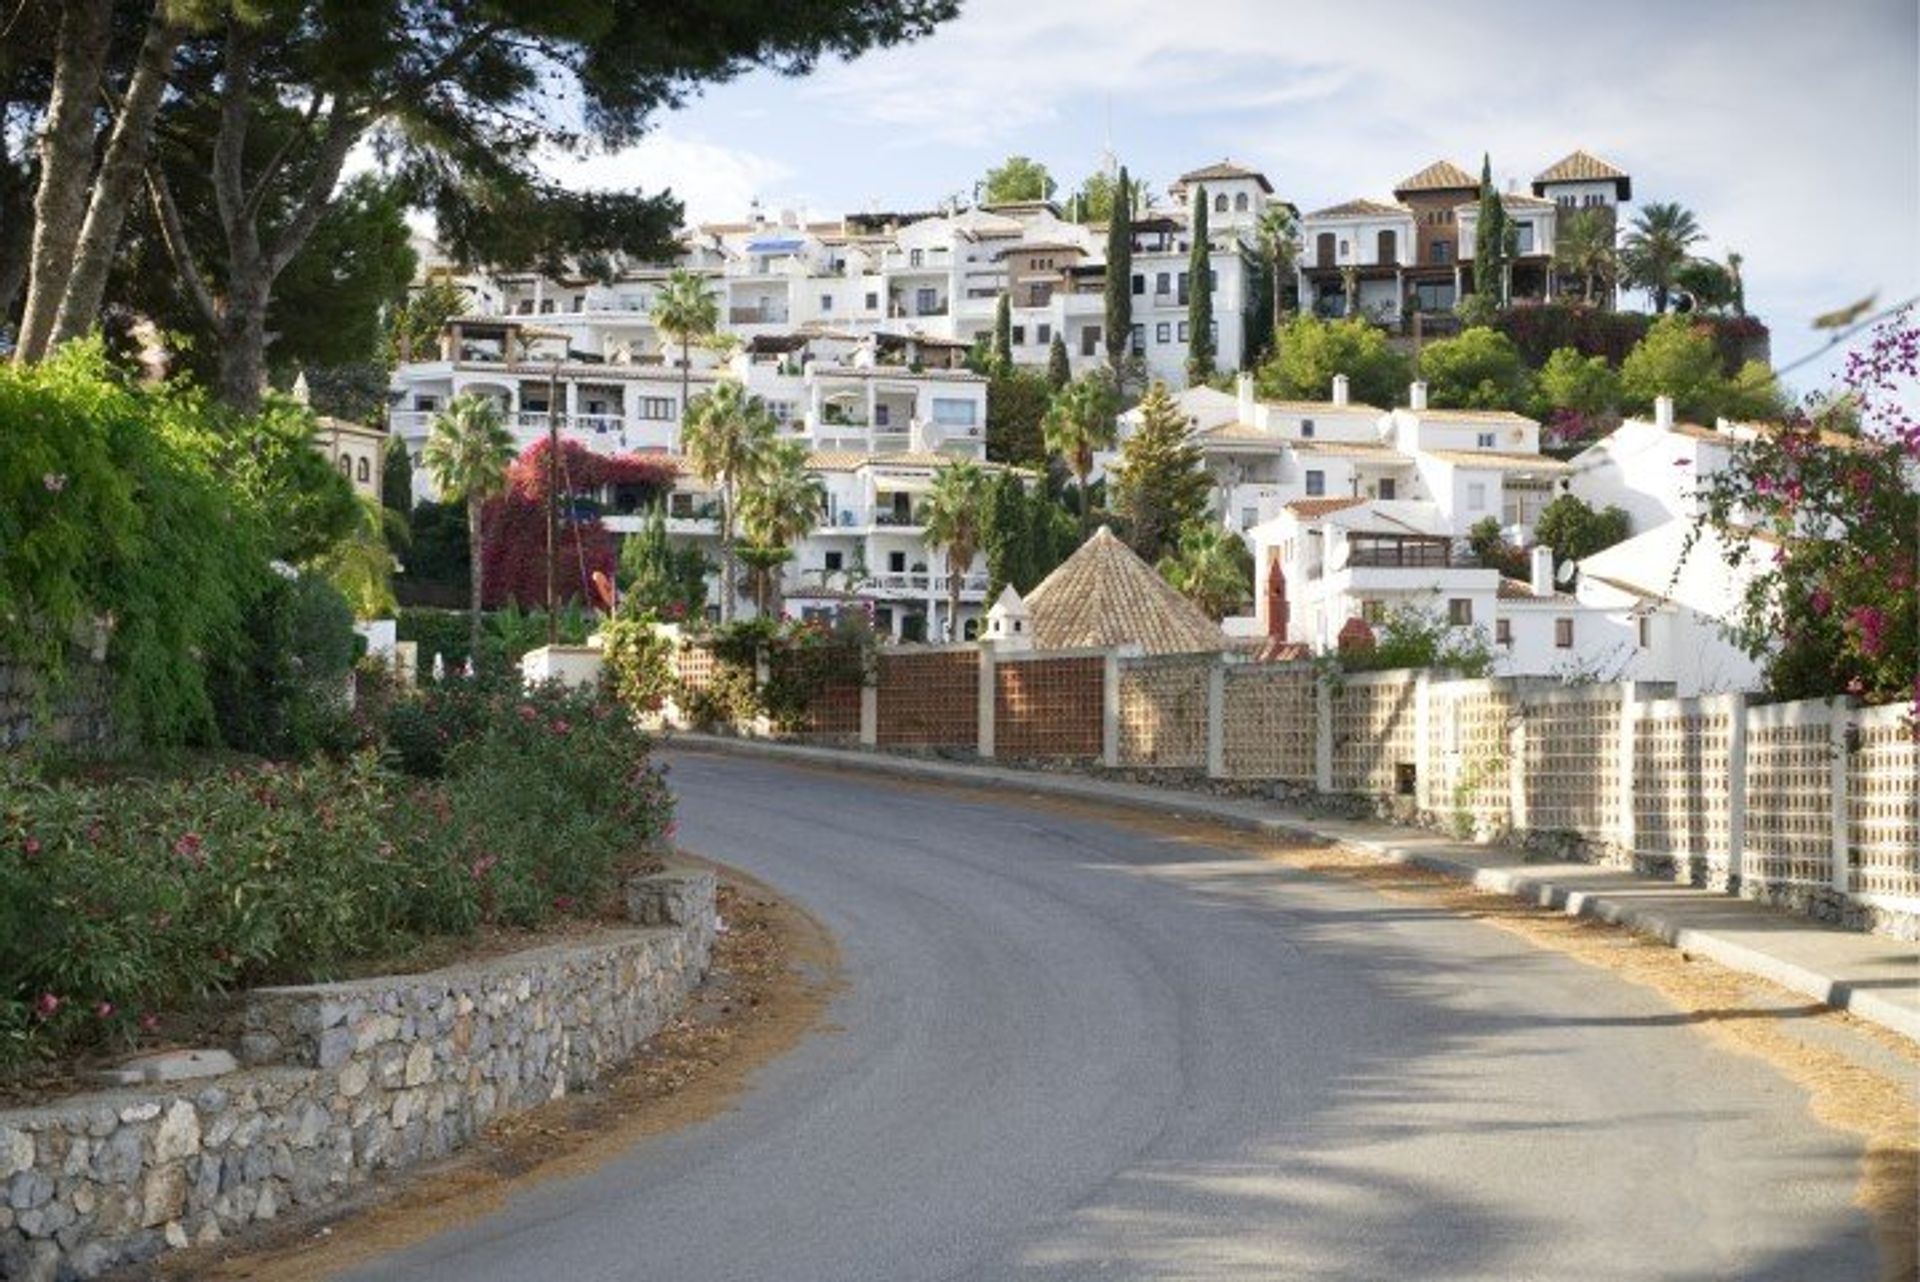 Enjoy a traditional Andalucian way of life, with a scattering of whitewashed villages and family-friendly beaches